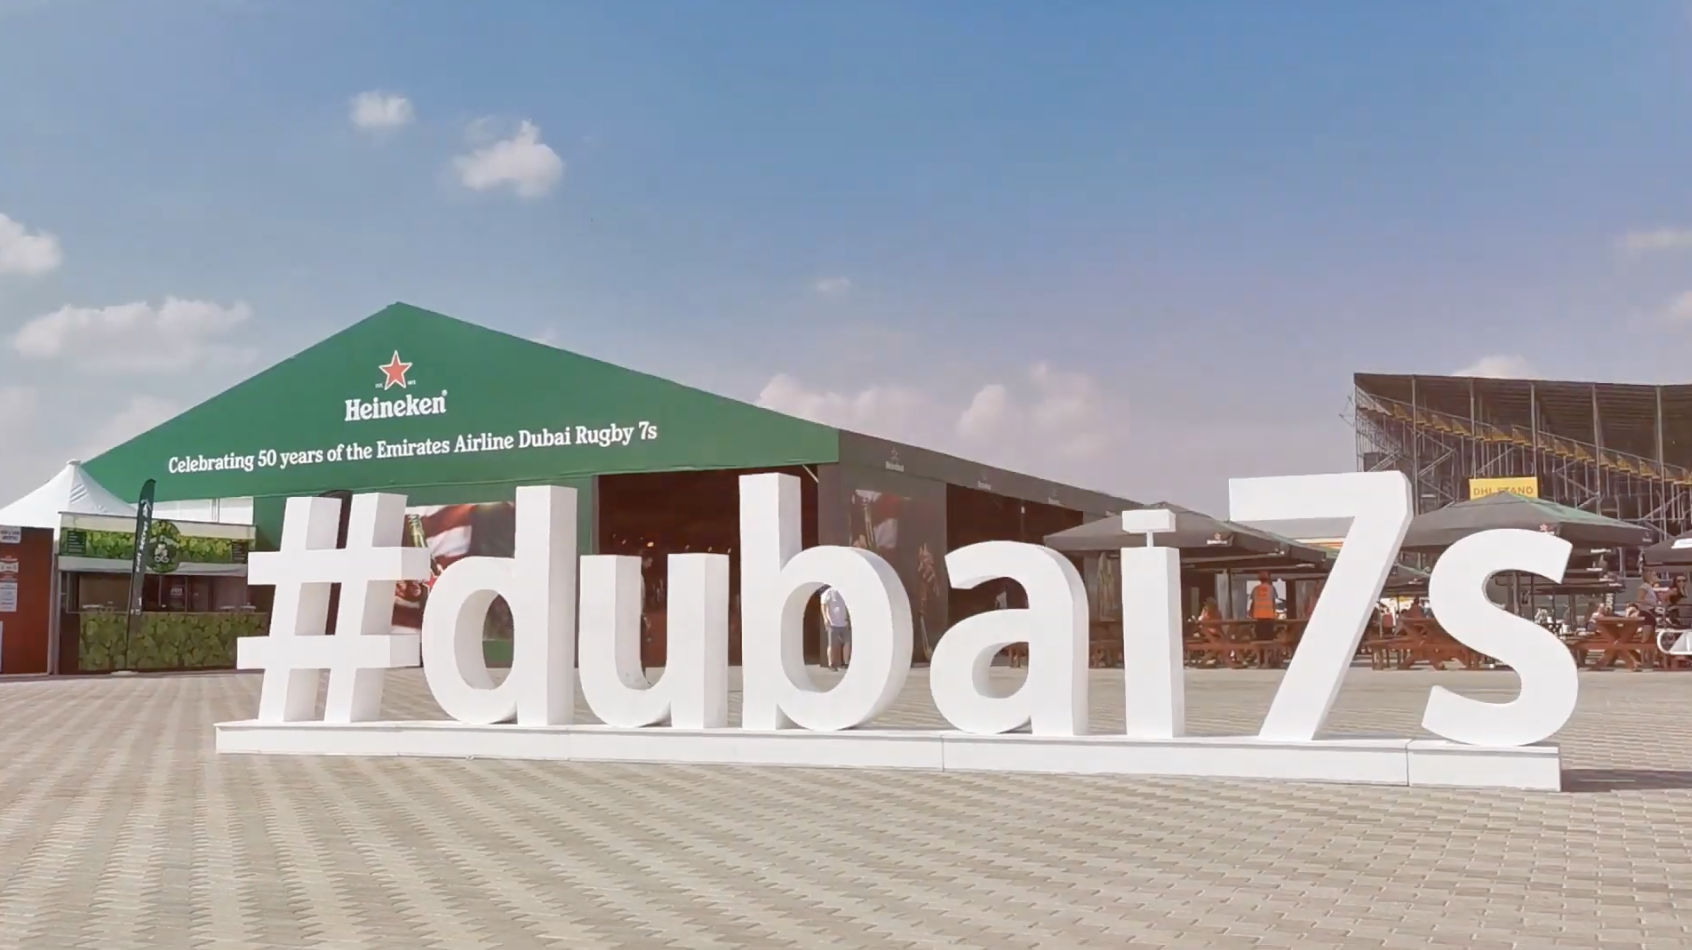 Possibly the coolest rugby sevens advert ever dropped this week in Dubai